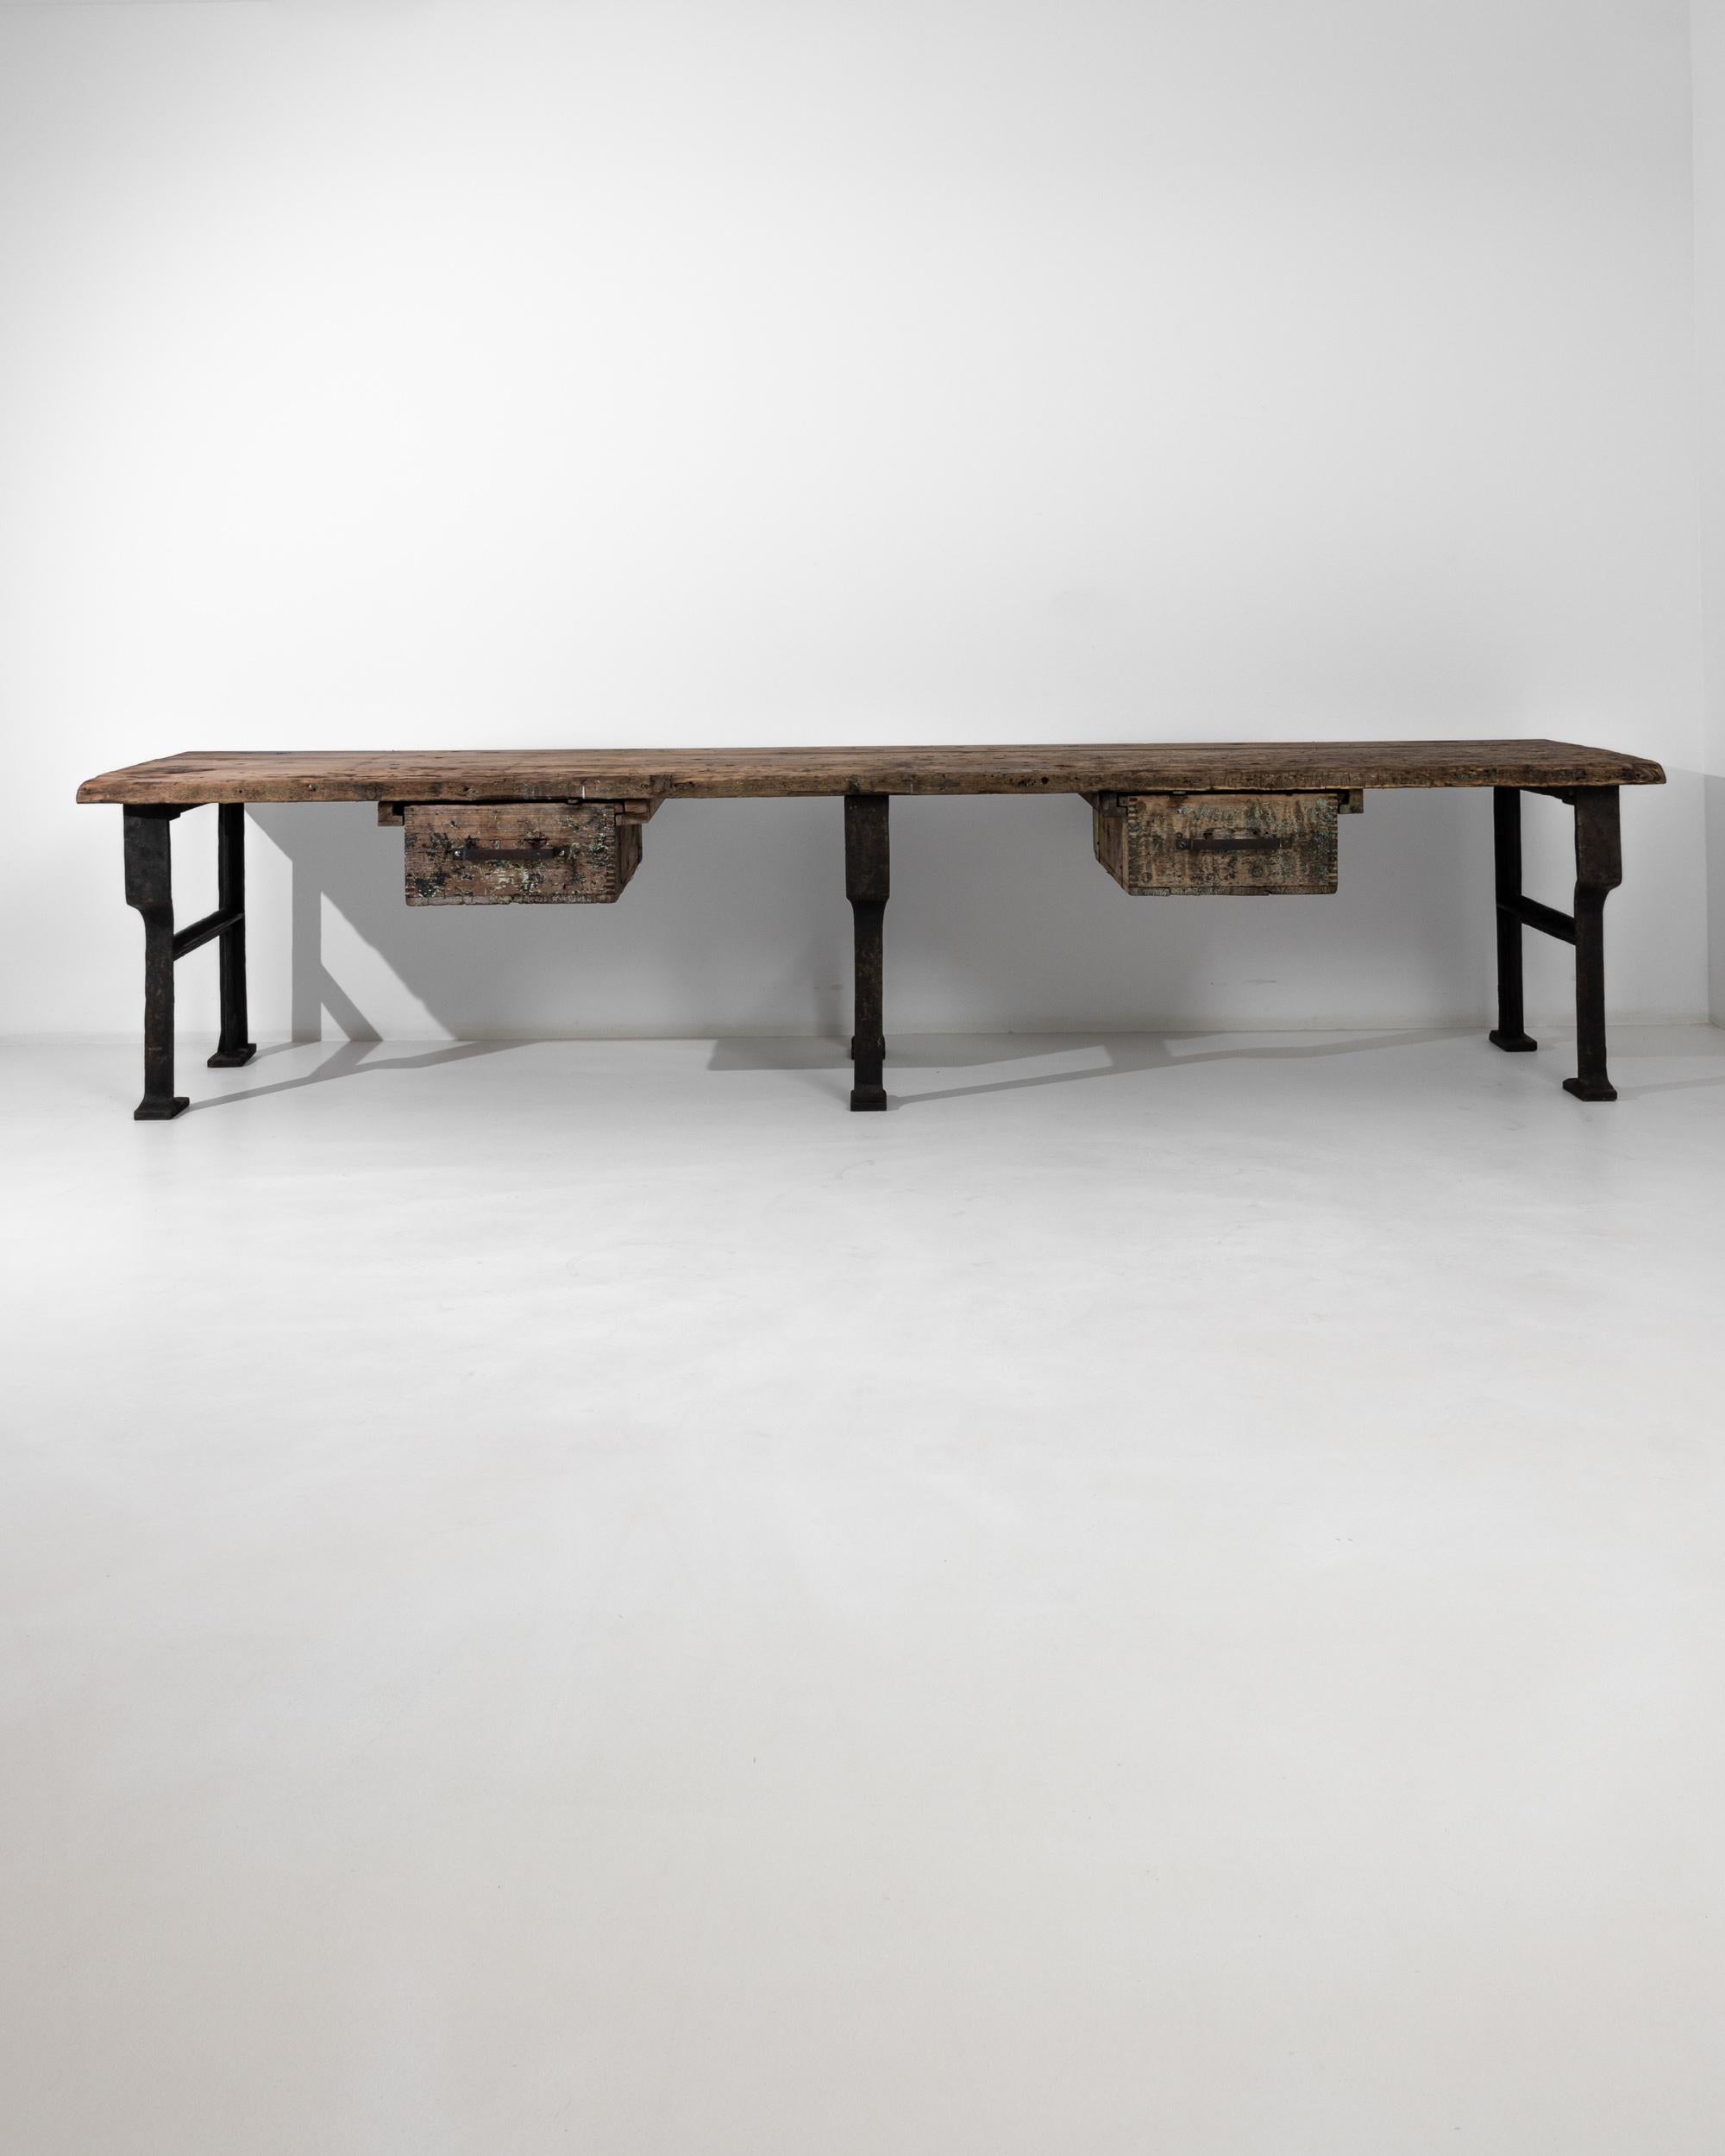 1950s Industrial Work Table from Czechia For Sale at 1stDibs